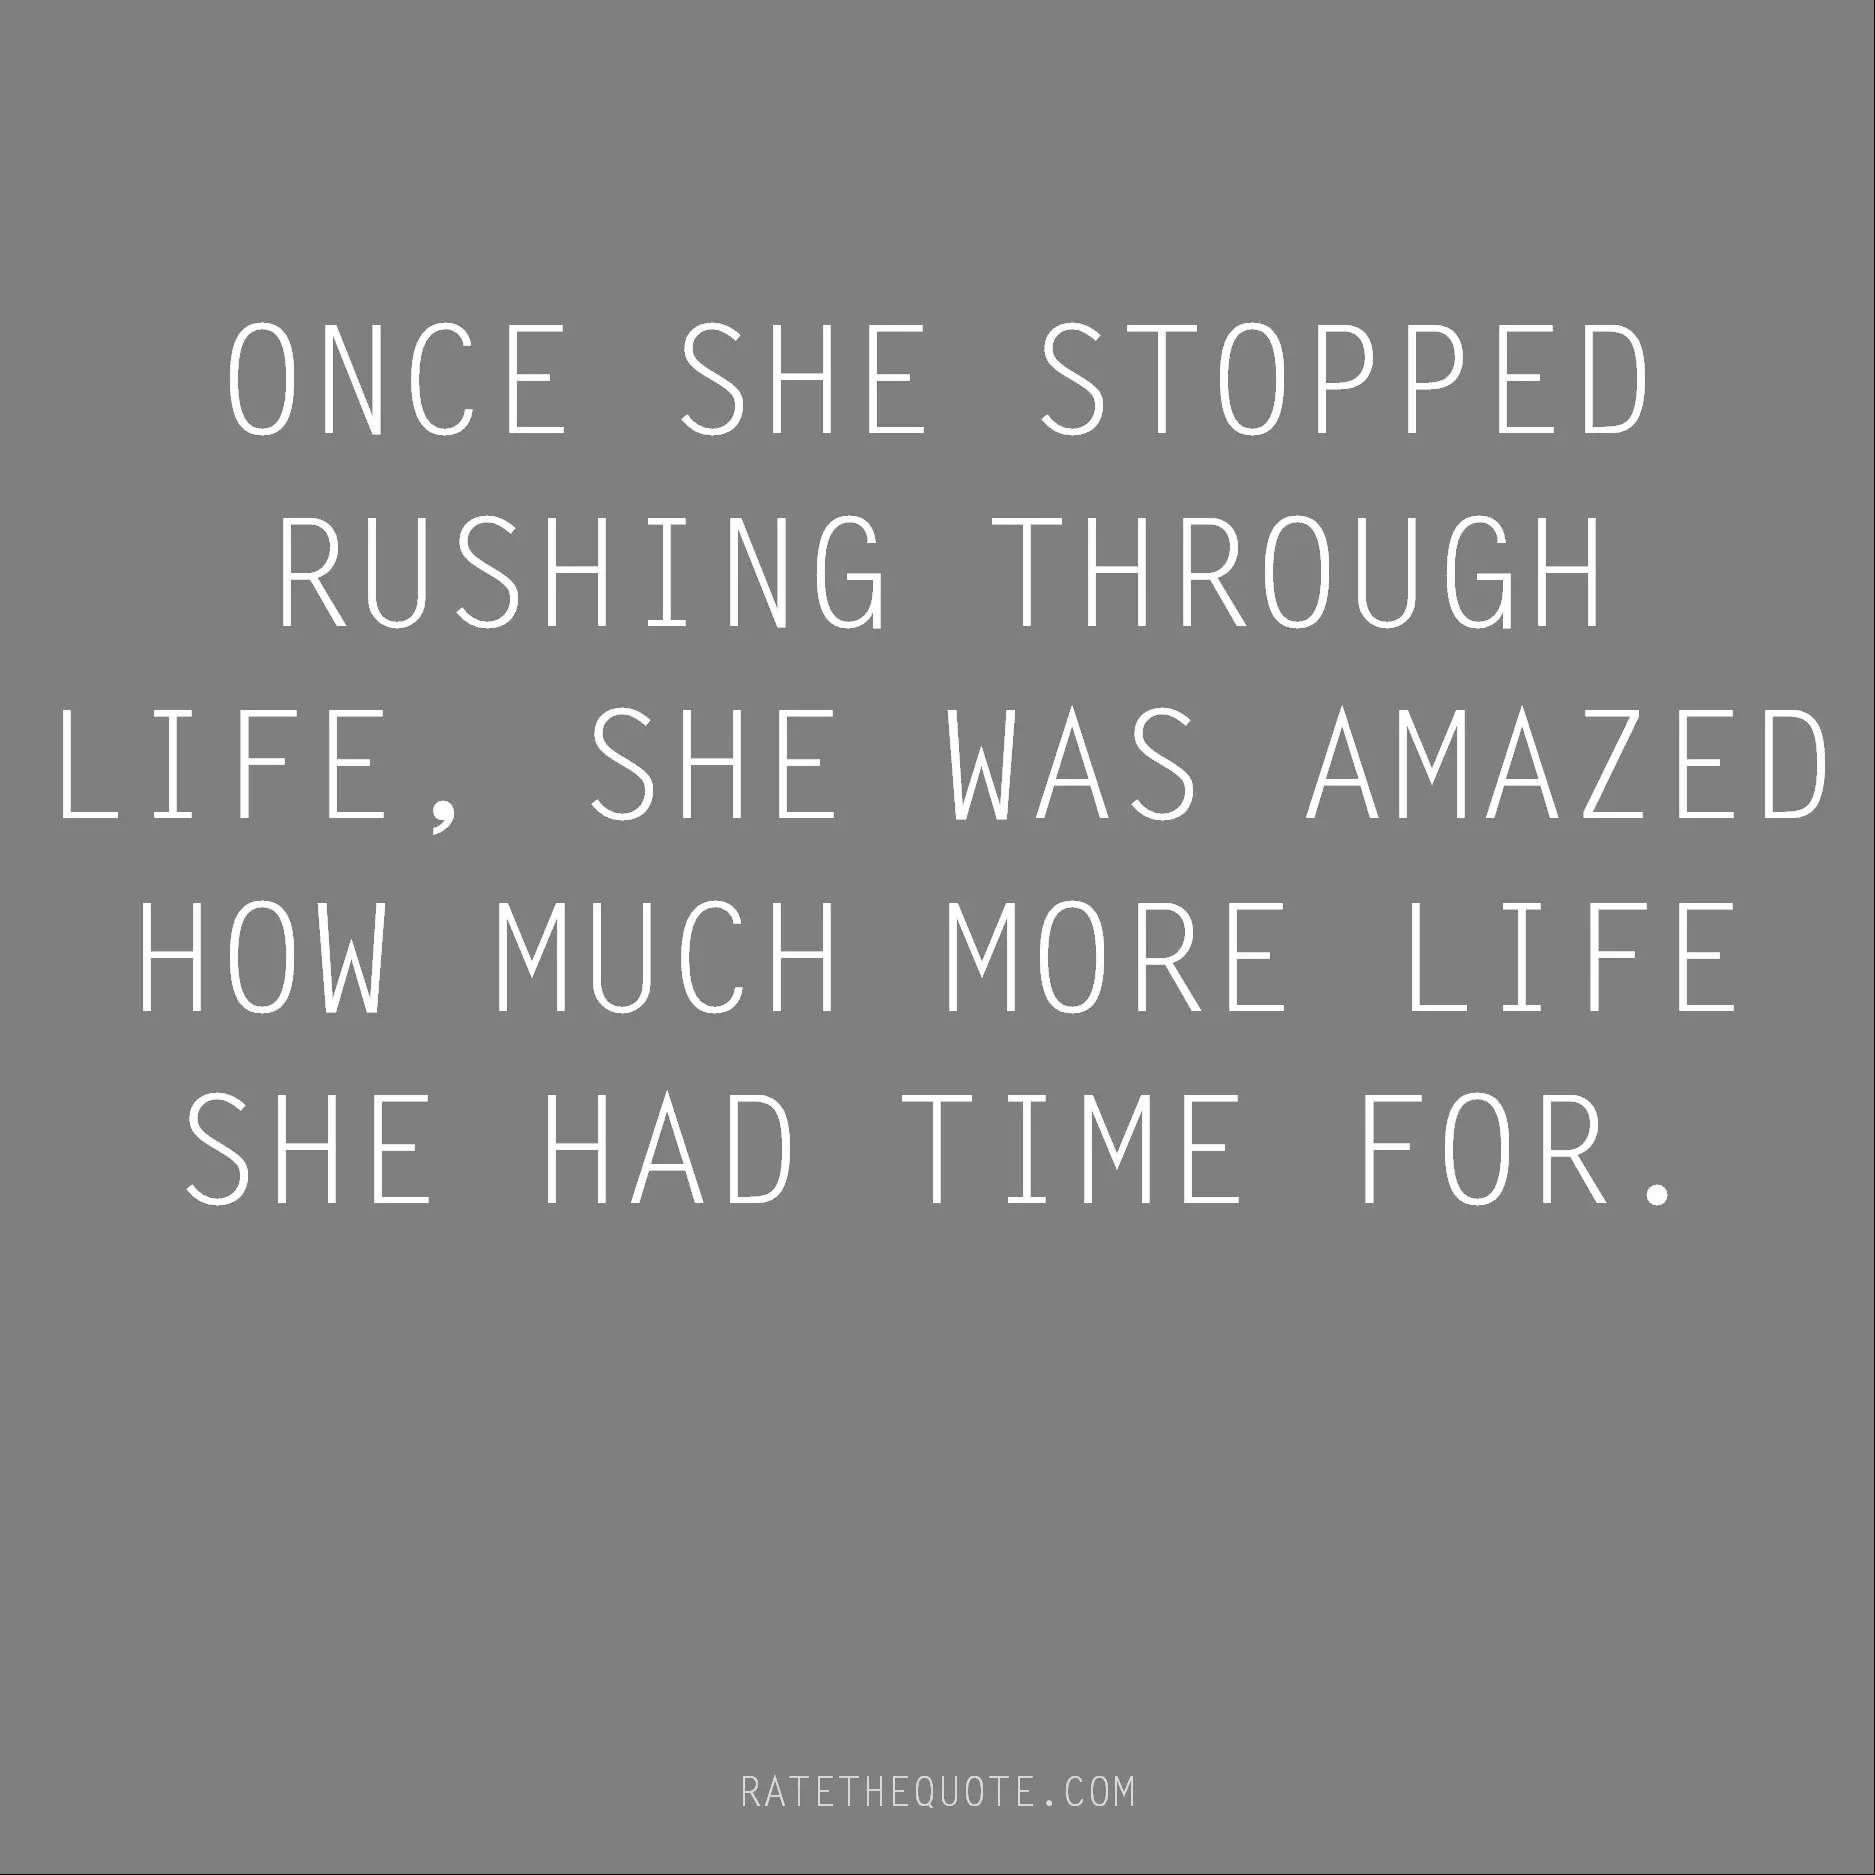 Once she stopped rushing through life, she was amazed how much more life she had time for.